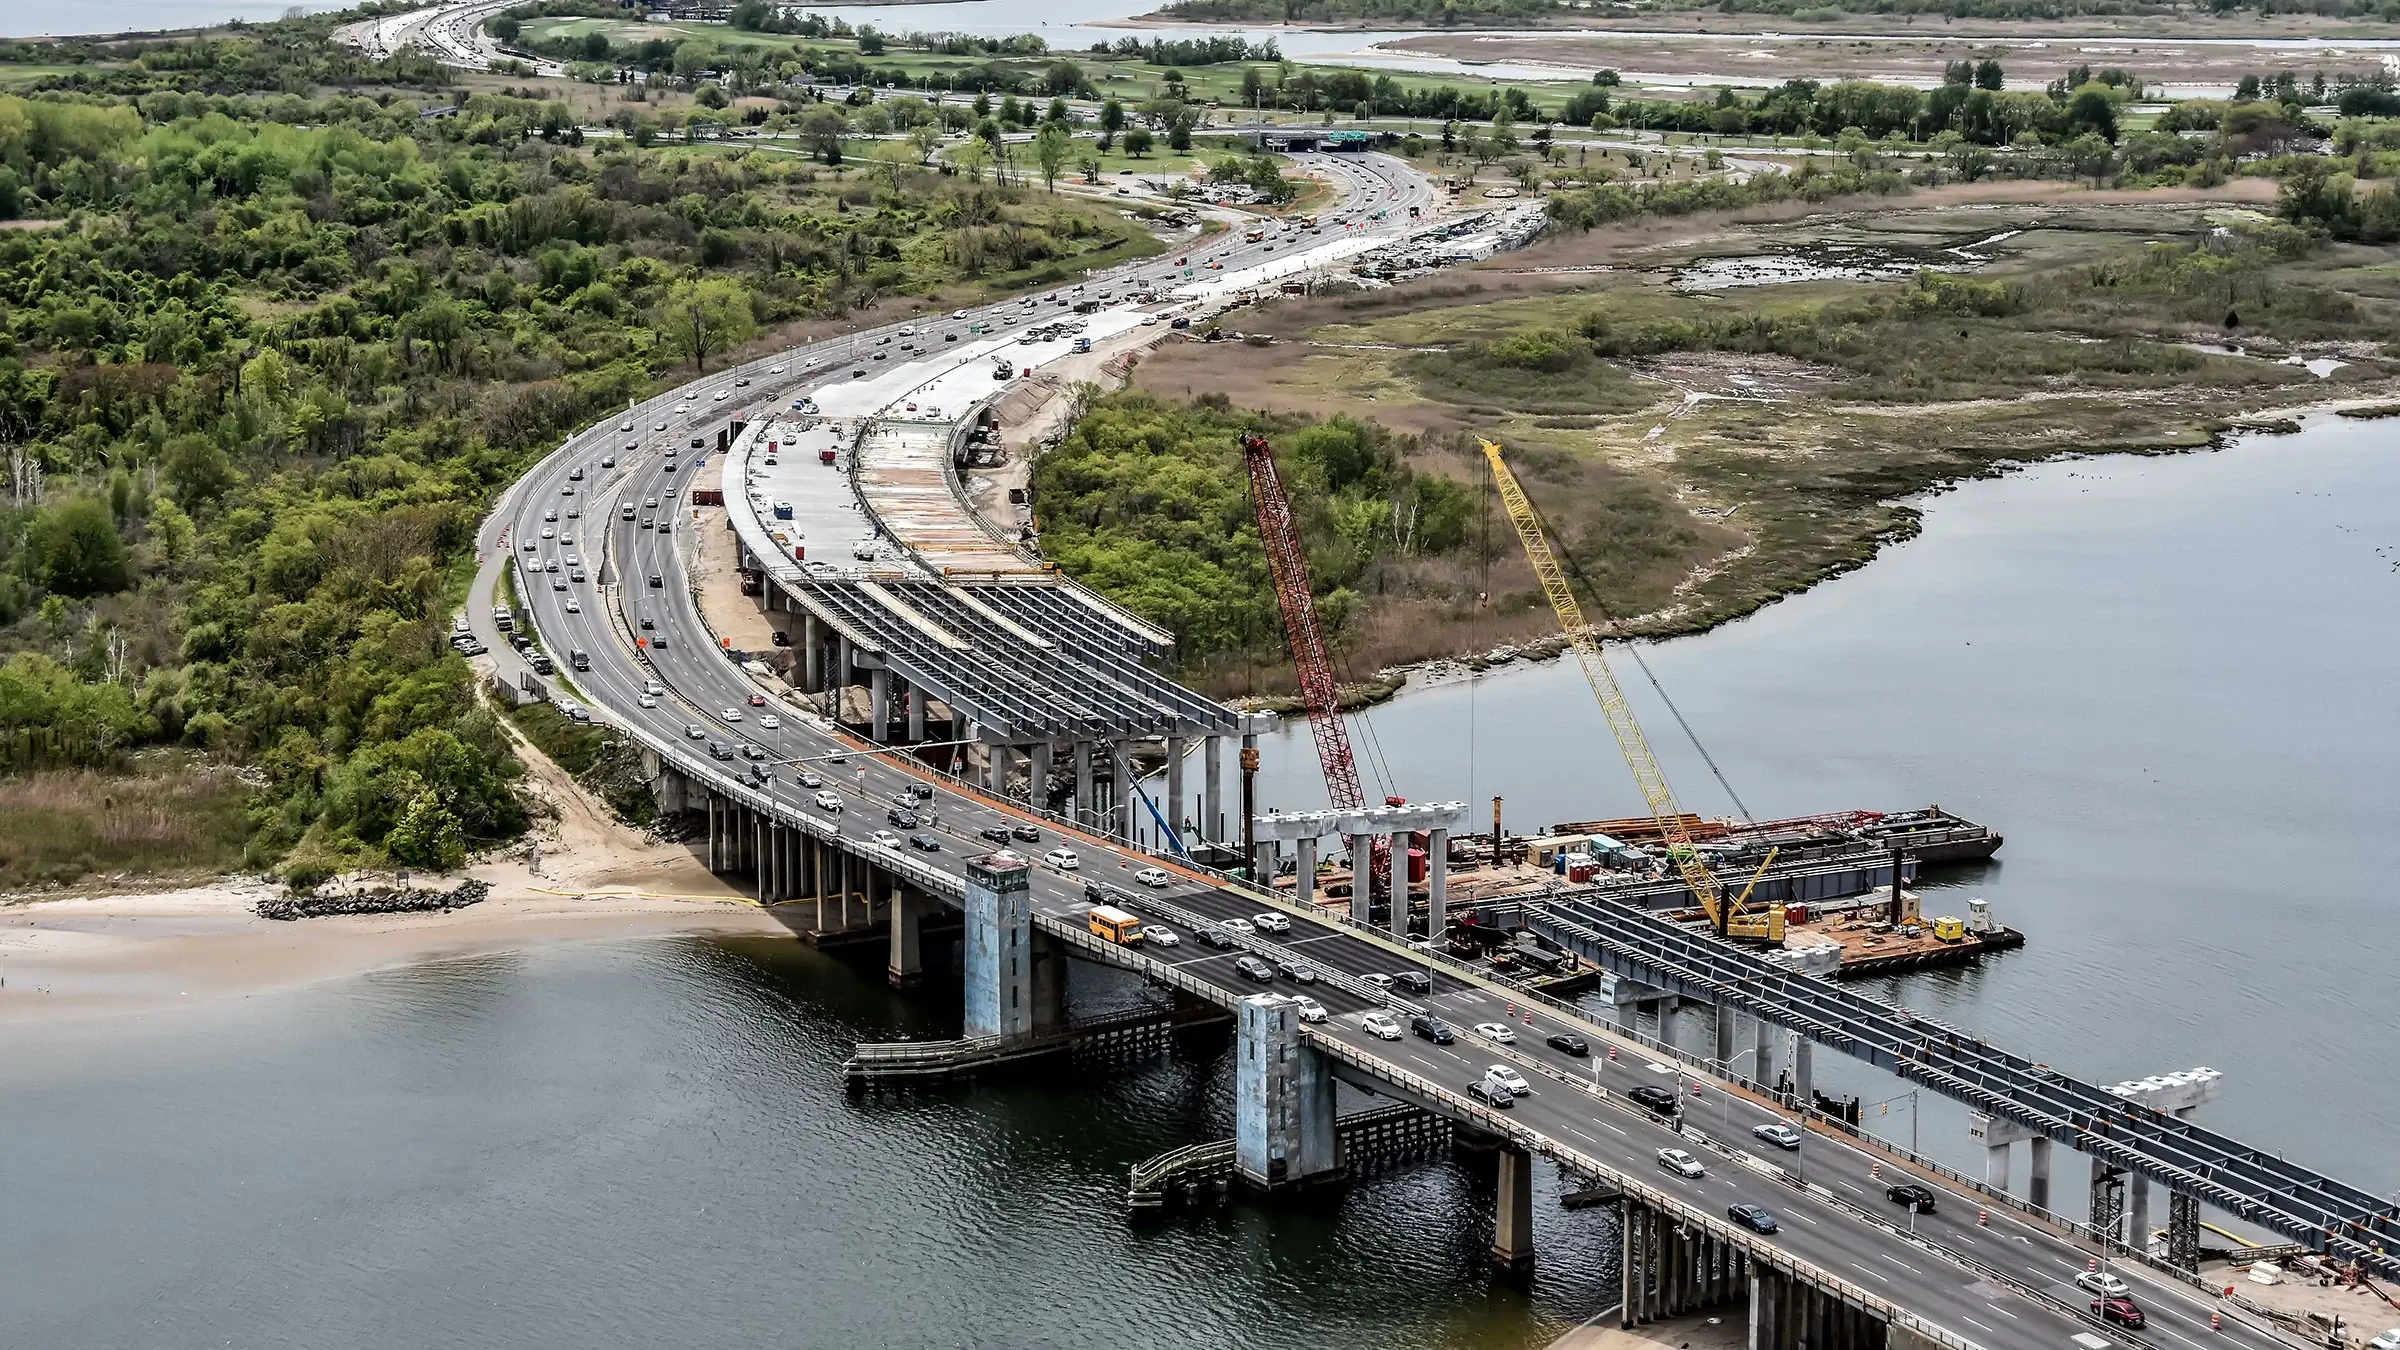 Aerial photo of bridge being built over a river.